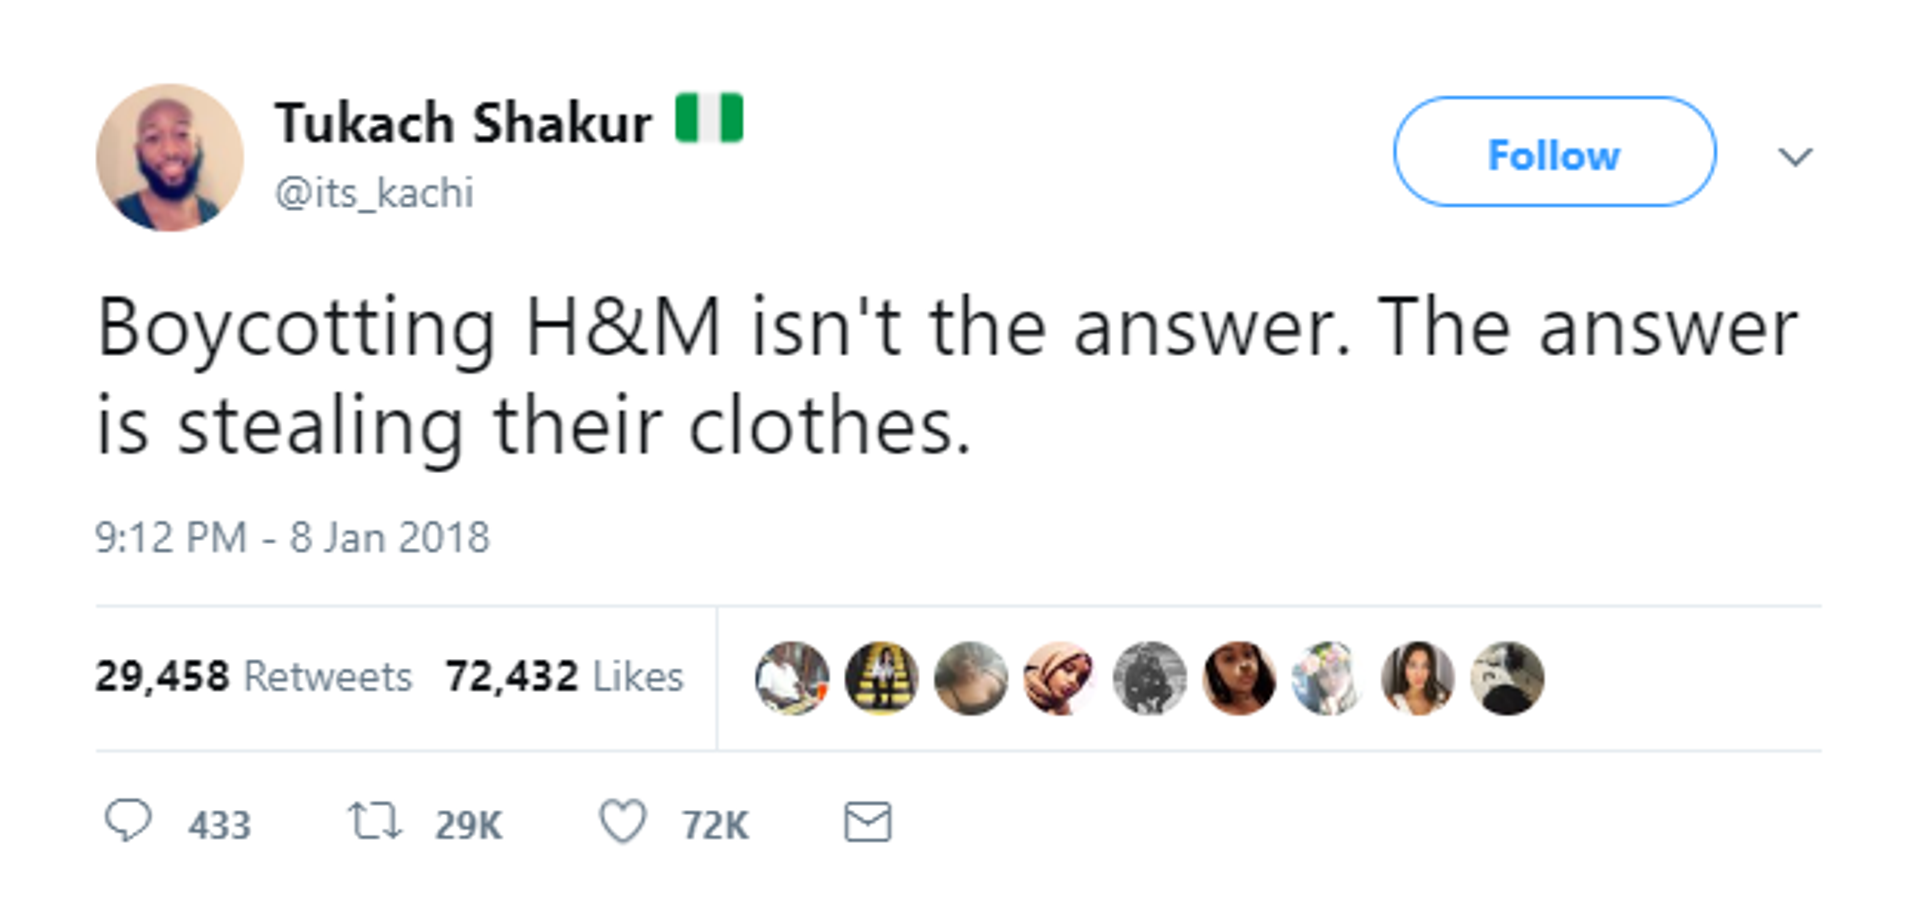 The screenshot of a tweet saying: "Boycotting H&M isn't the answer. The answer is stealing their clothes."